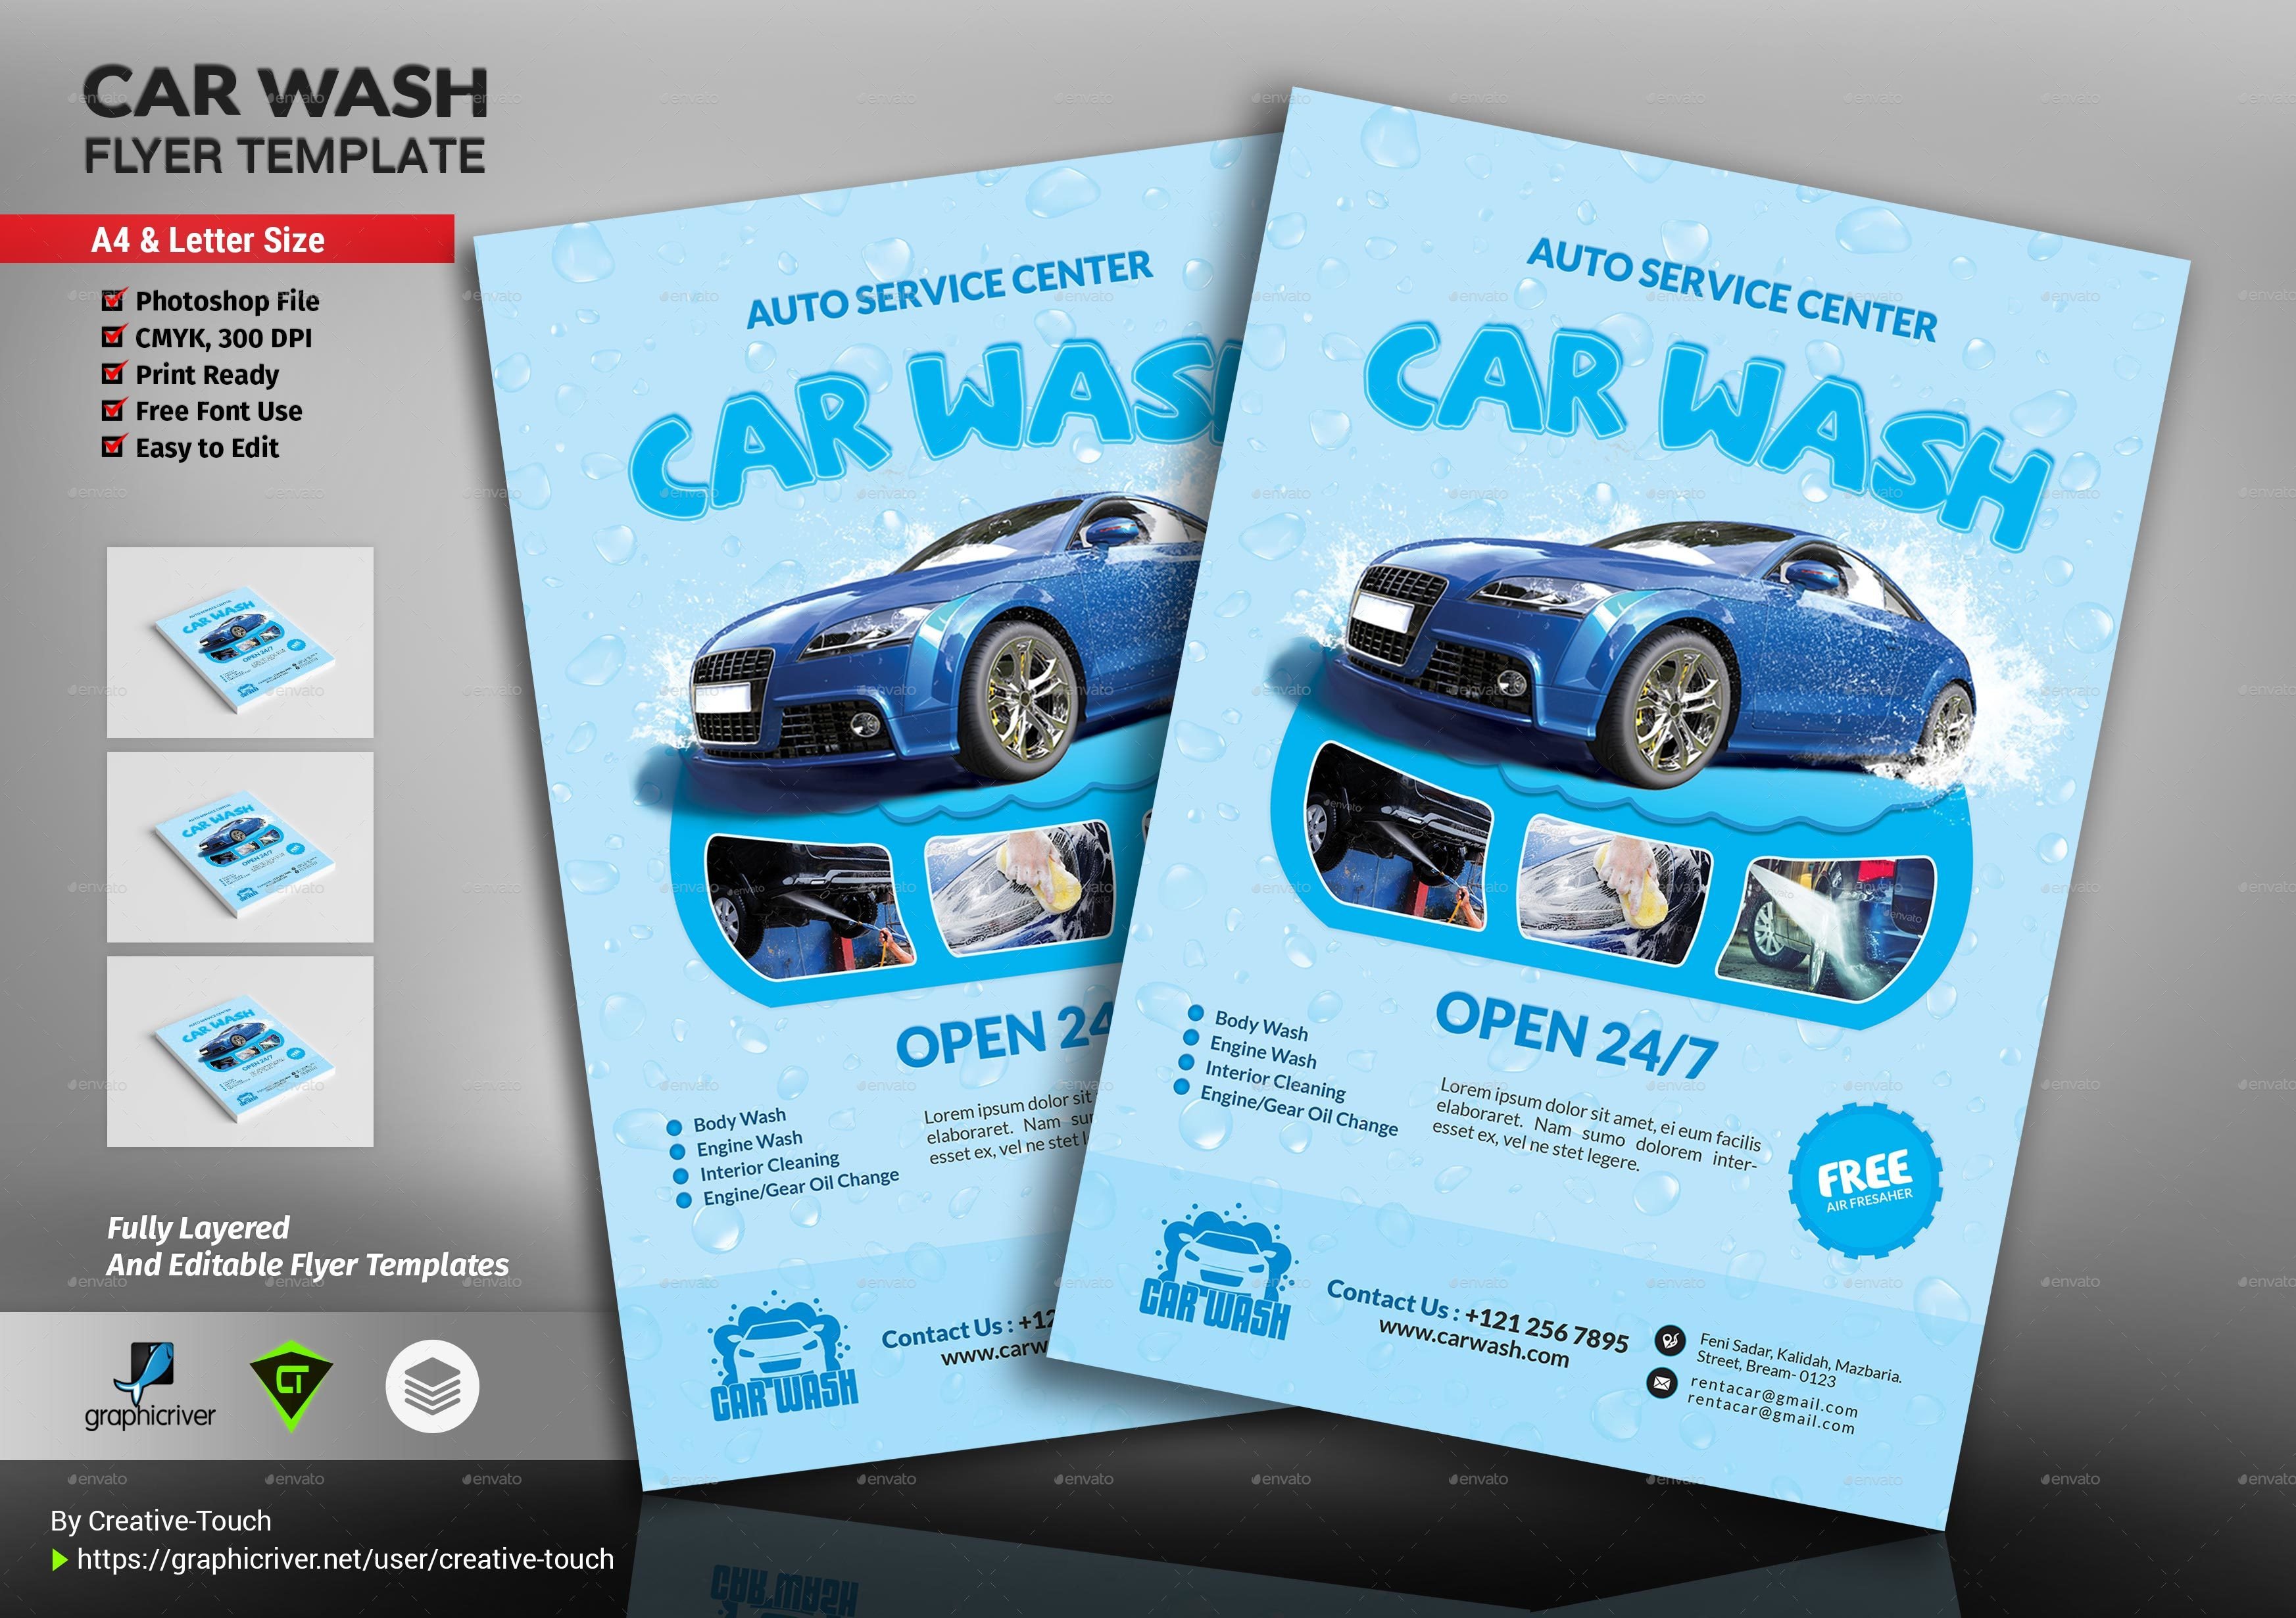 Car Wash Flyer Template Car Wash Flyer Template by Creative touch